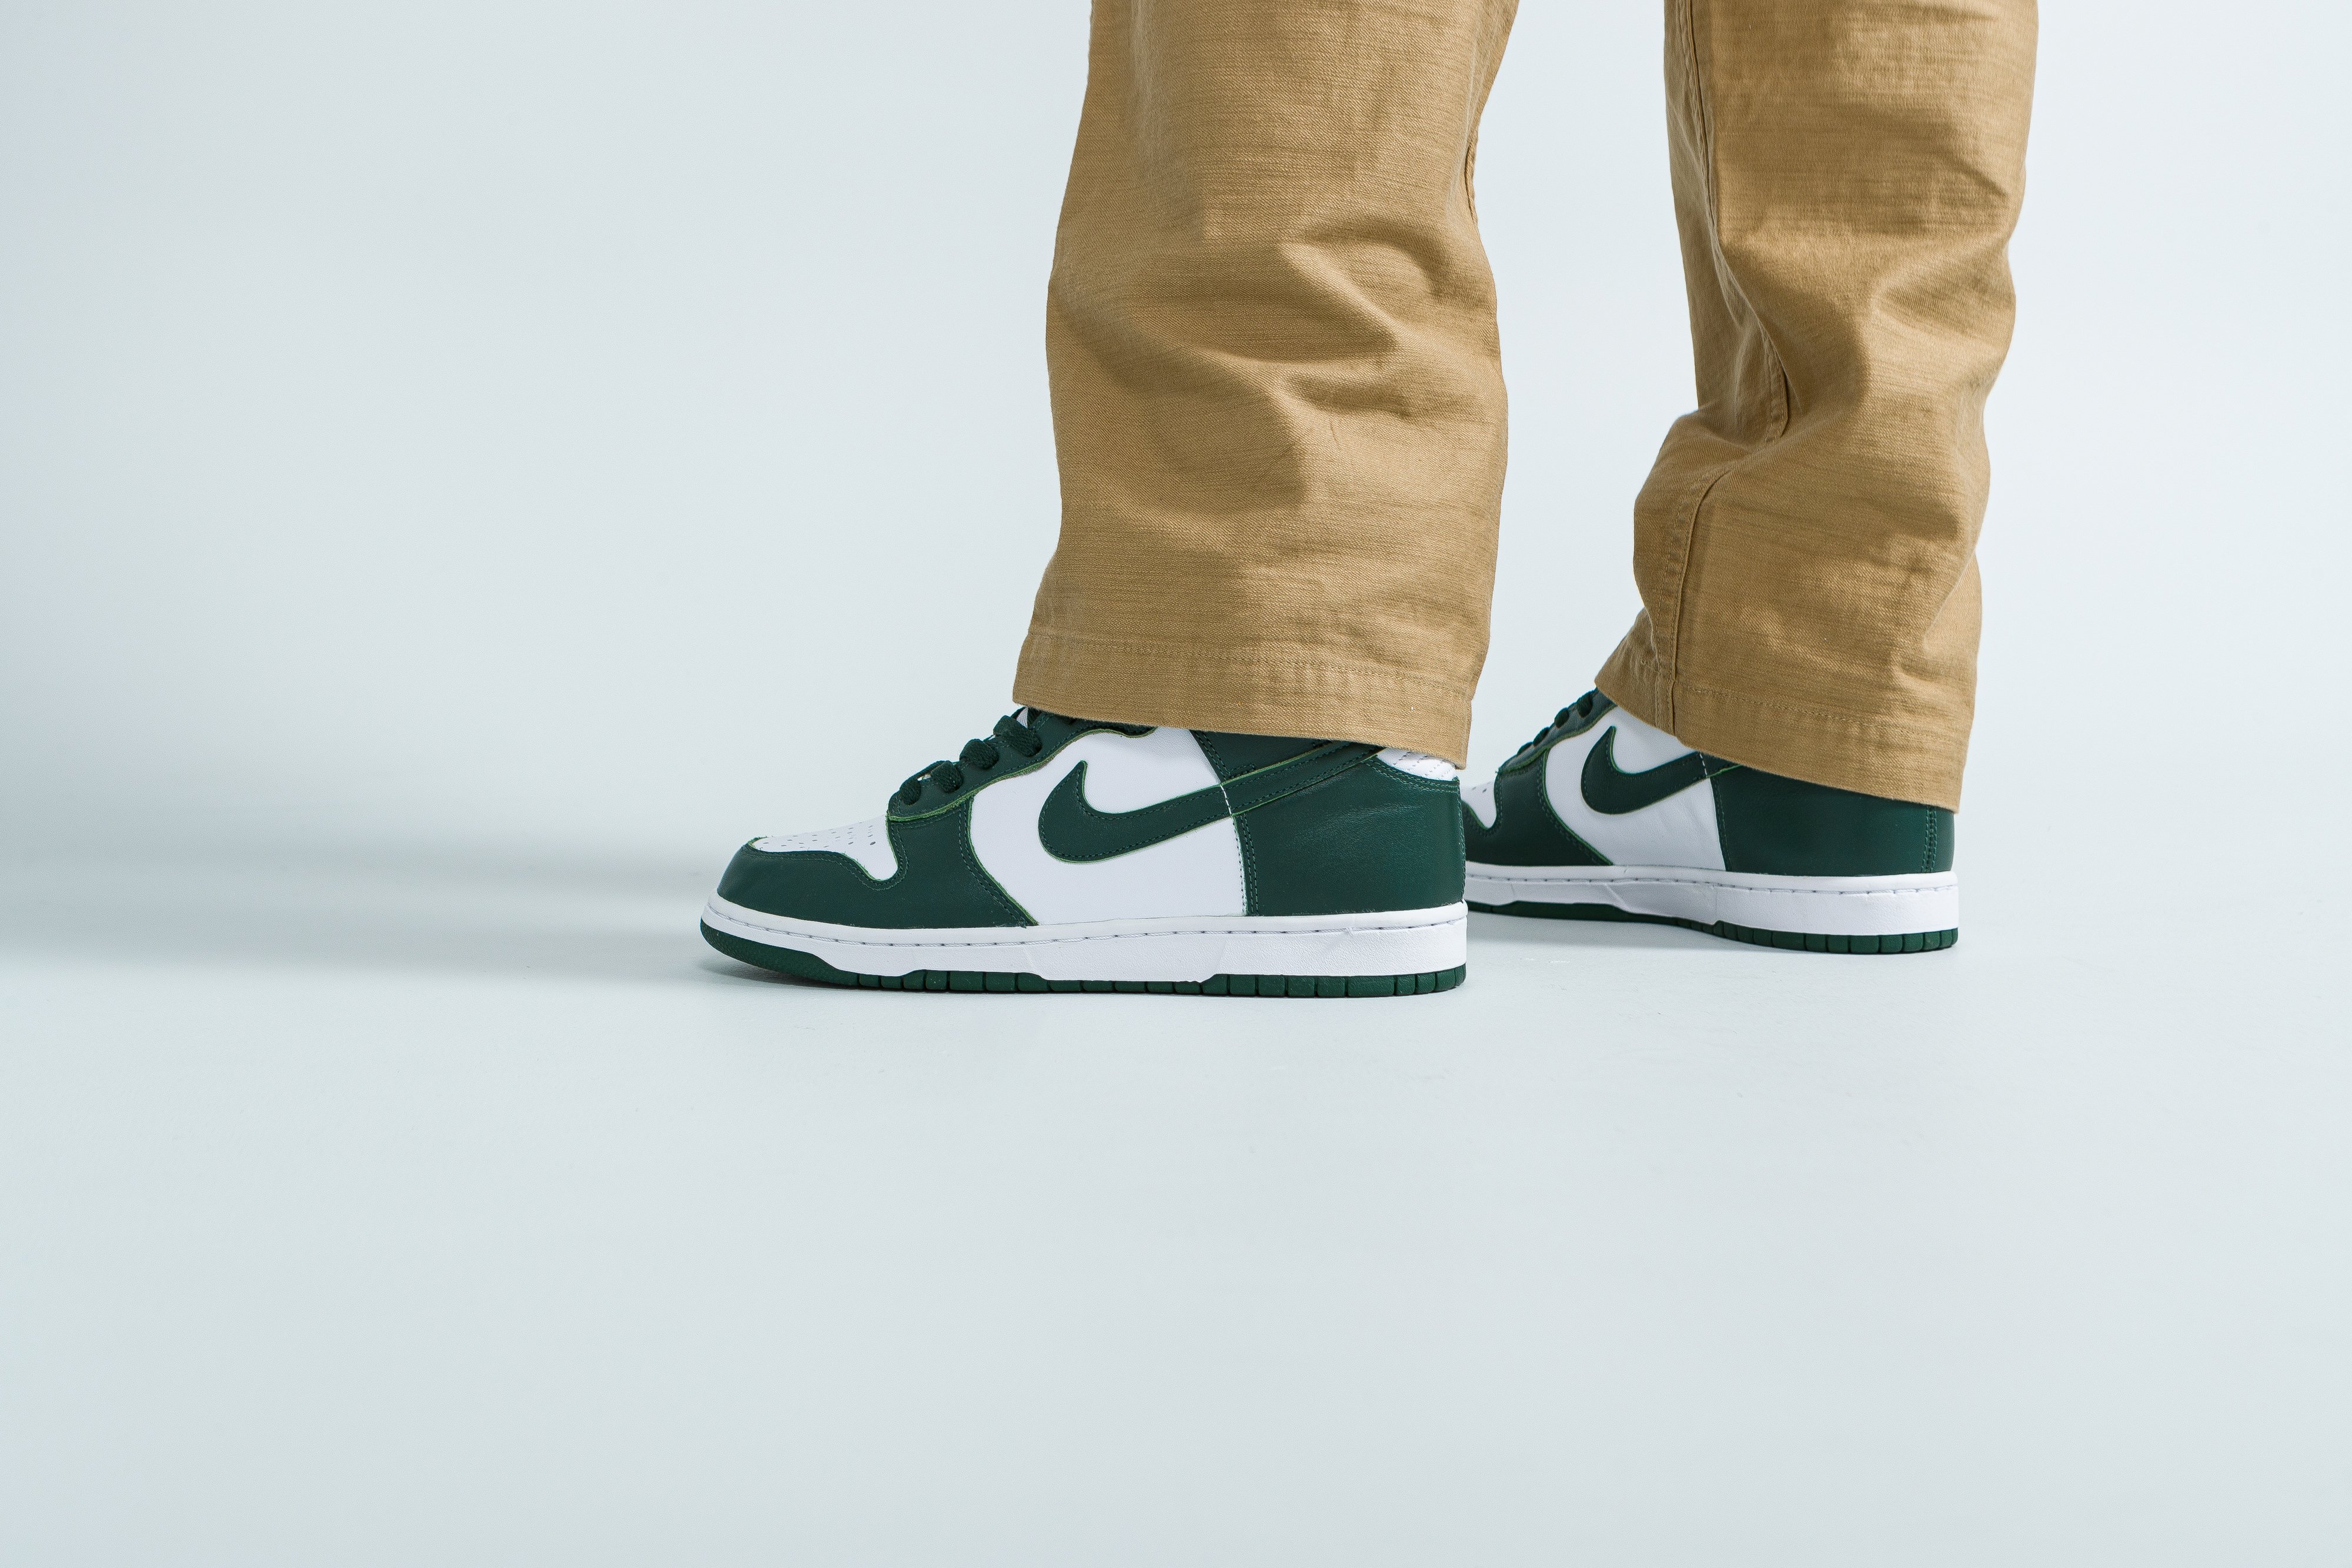 Up There Launches - Nike
Dunk Hi SP - White/Pro Green-Pro Green